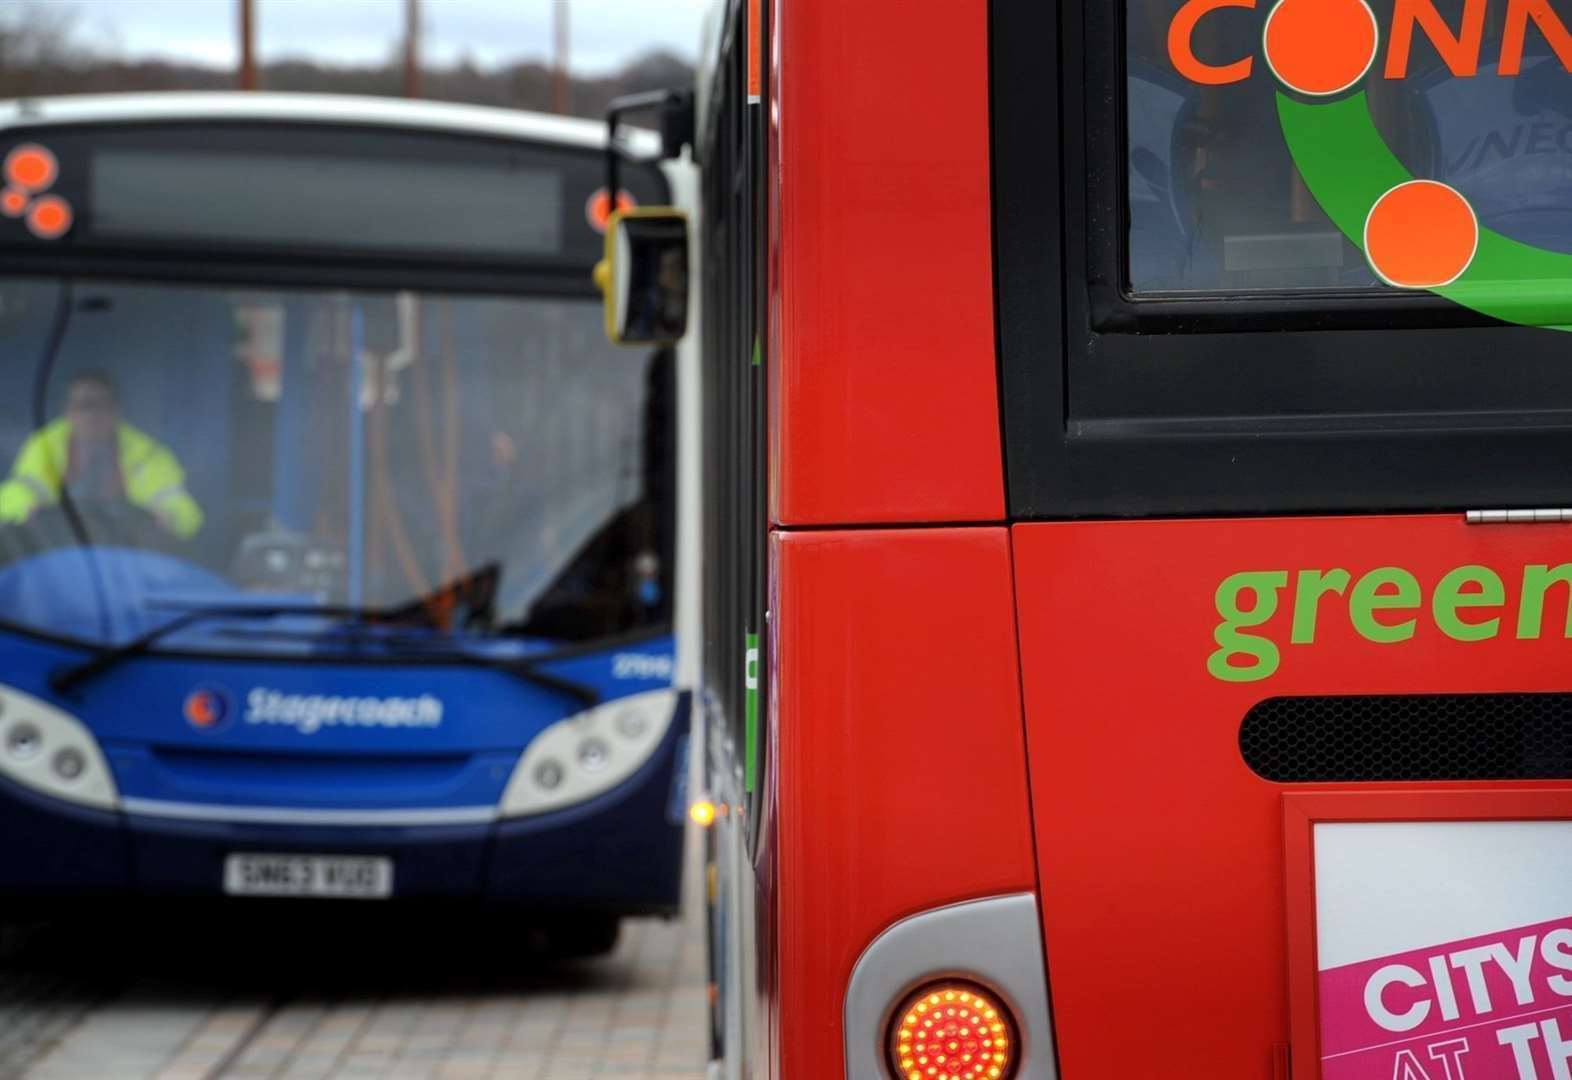 Passengers are still complaining about the level of service offered by Stagecoach.